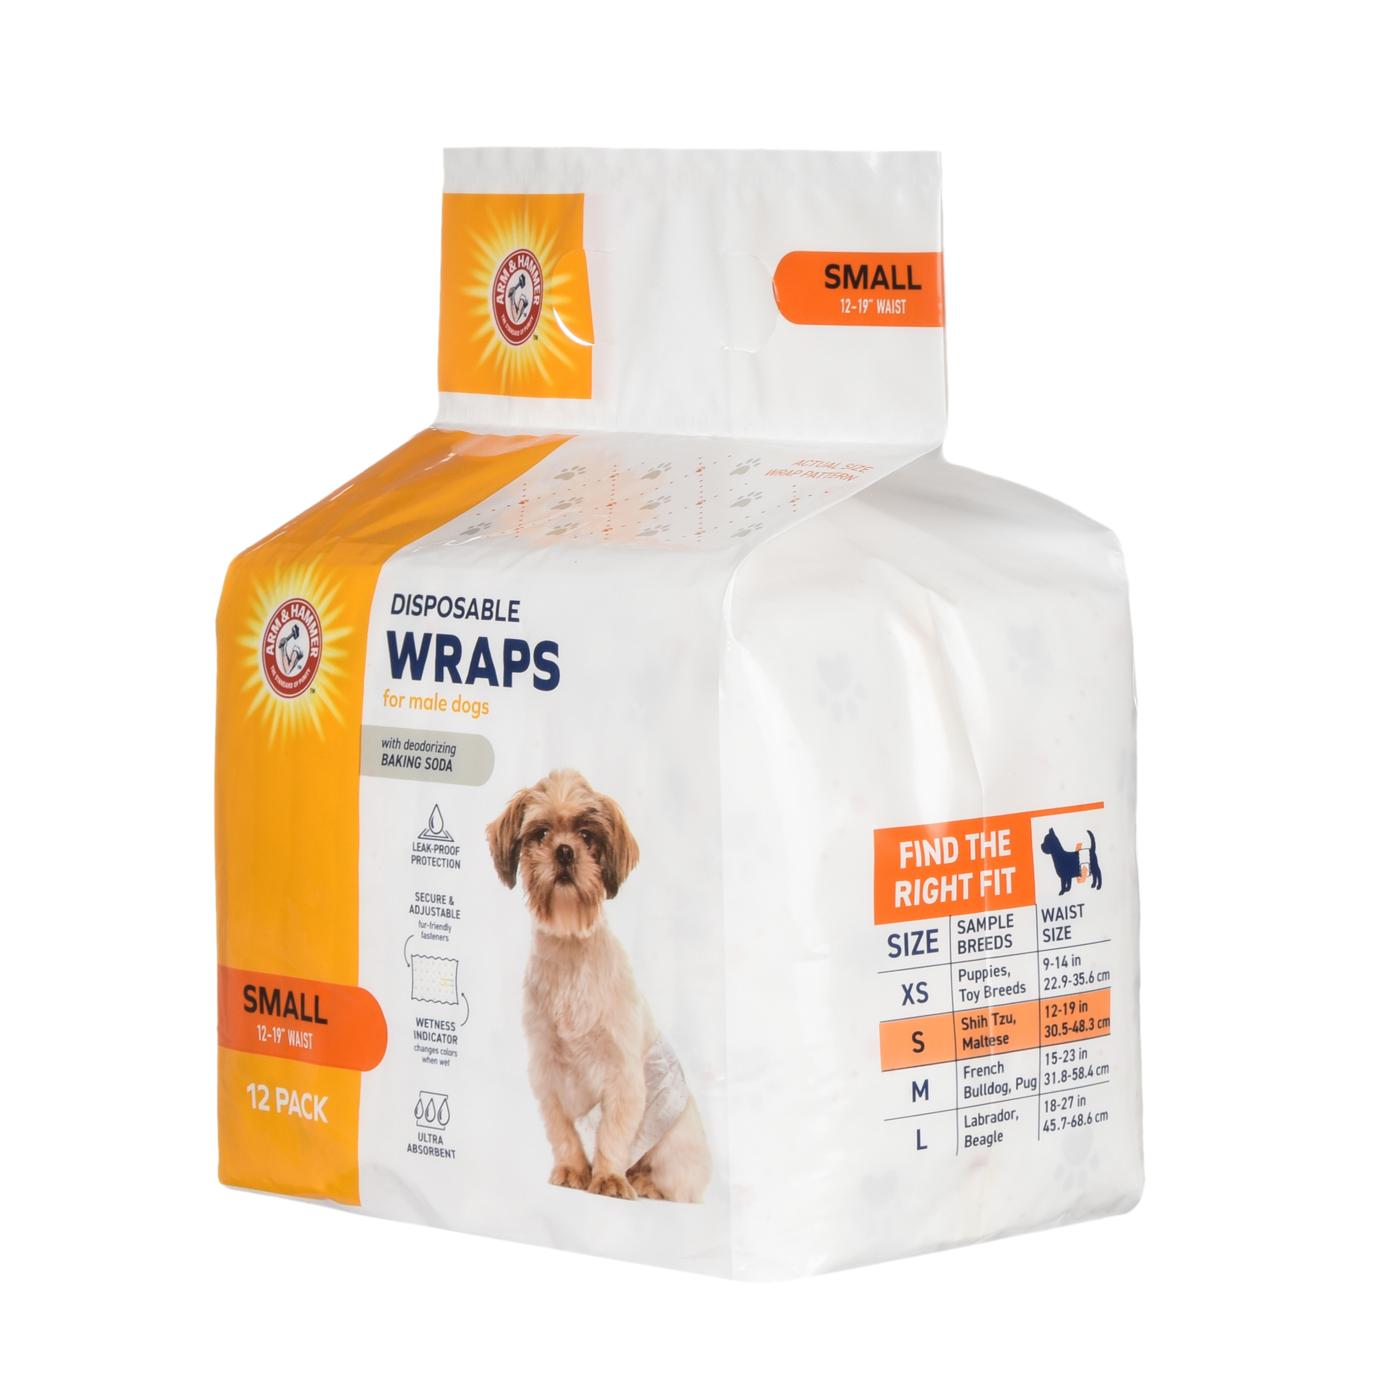 Arm & Hammer Disposable Wraps for Male Dogs - Small; image 2 of 3